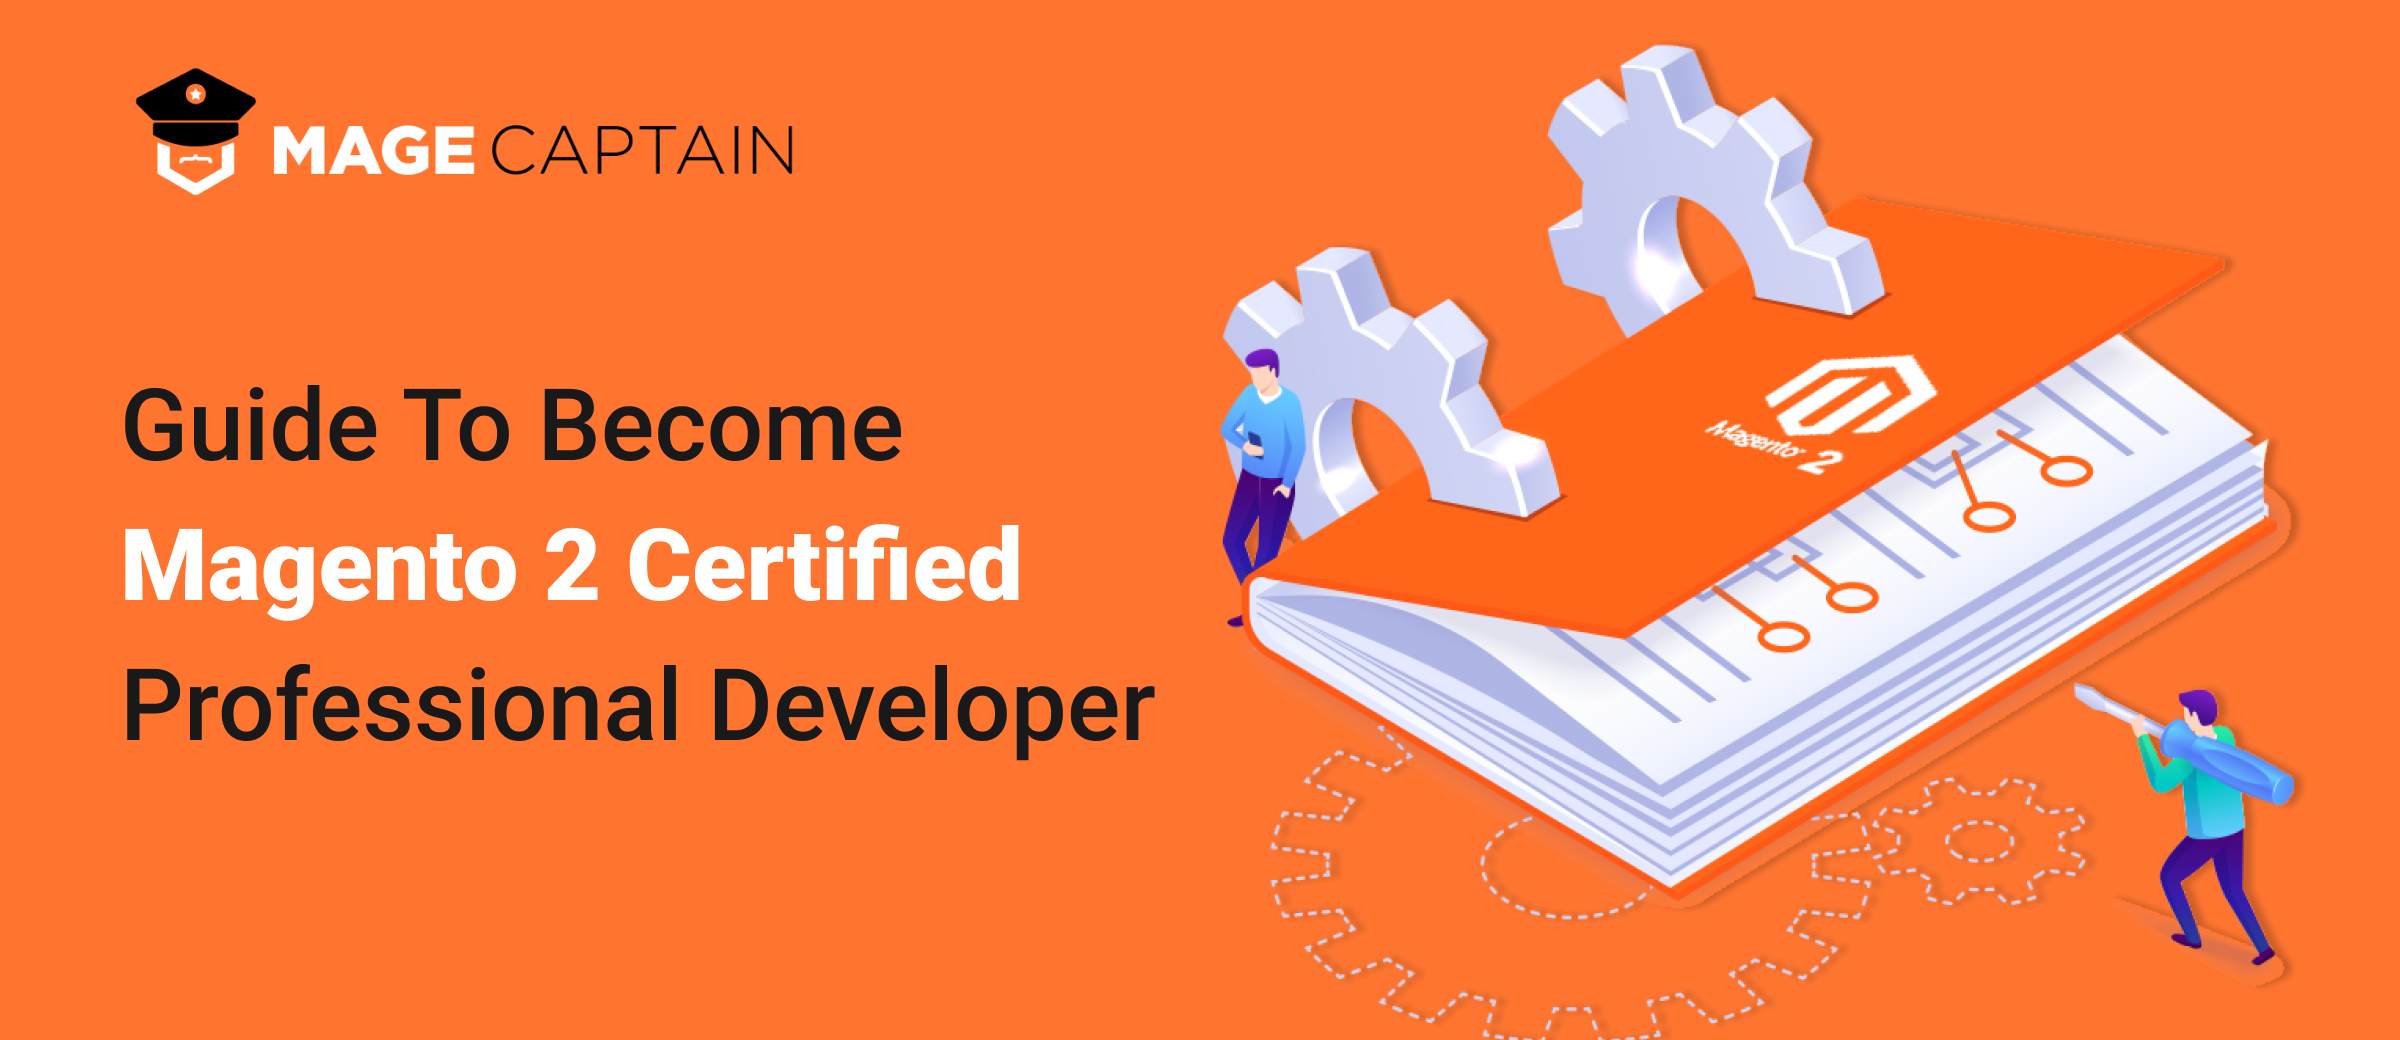 A Complete Guide To Become Magento 2 Certified Professional Developer 